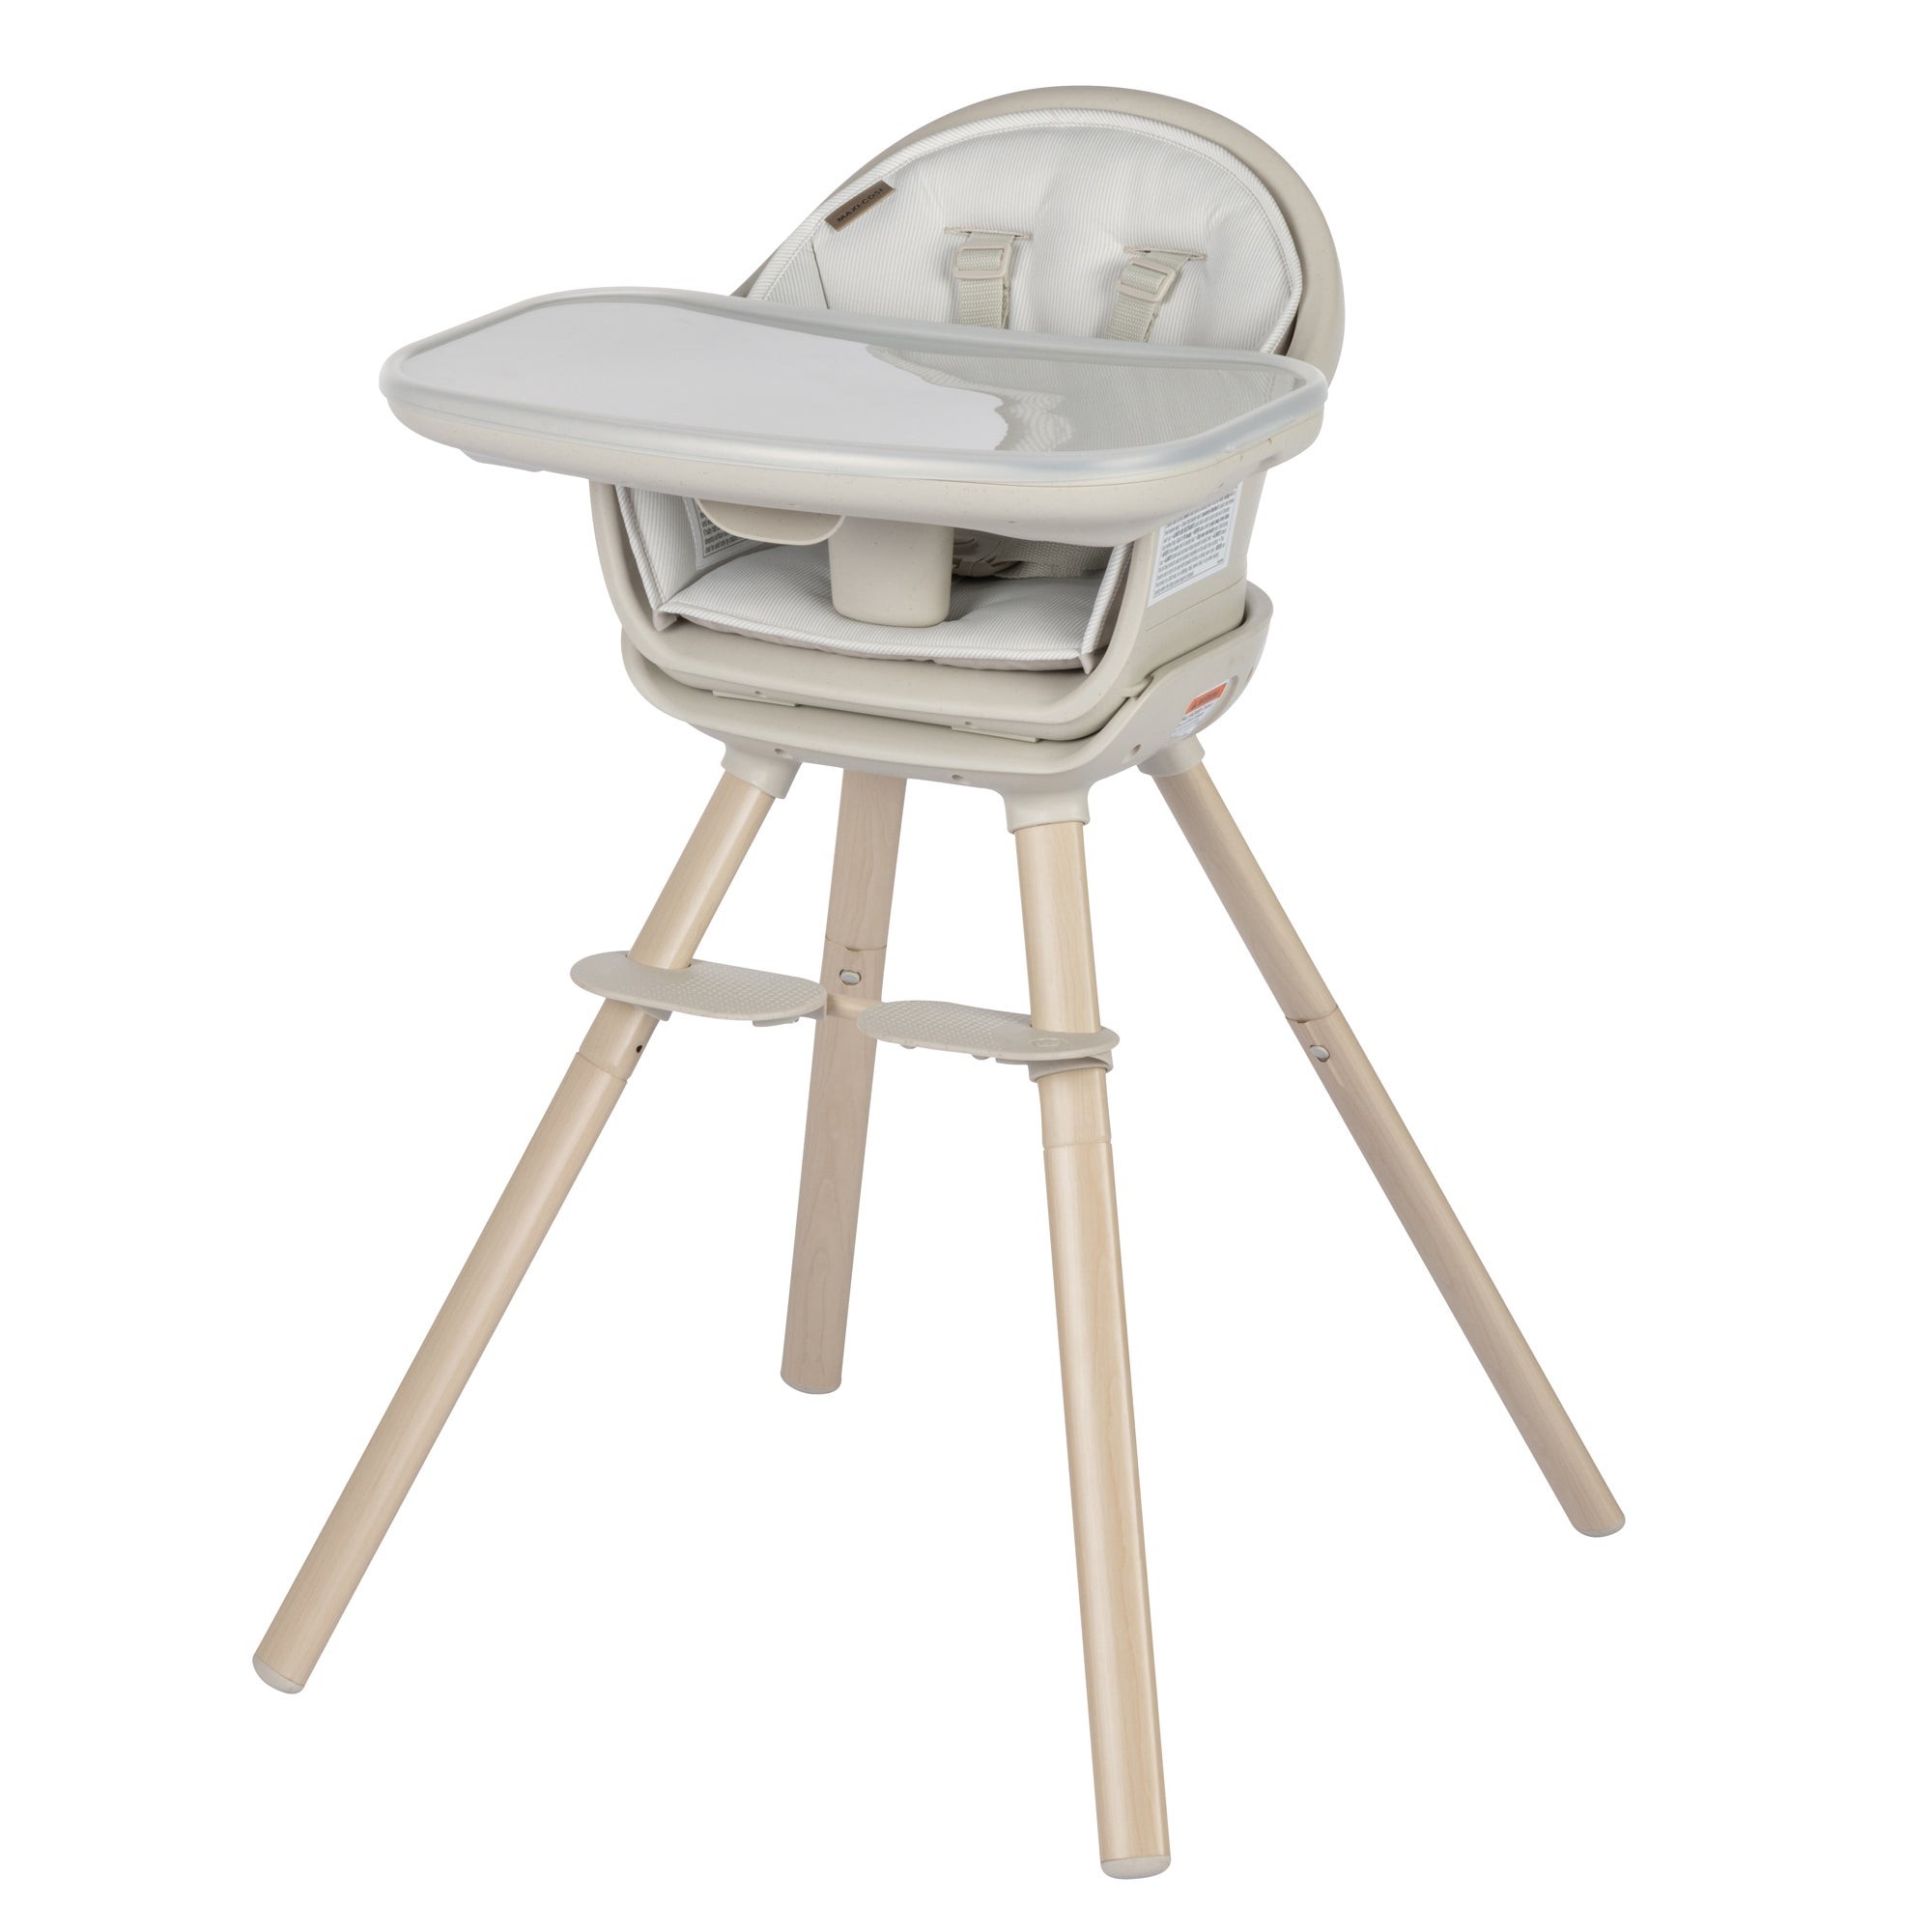 Moa 8-in-1 High Chair - EcoCare Classic Oat